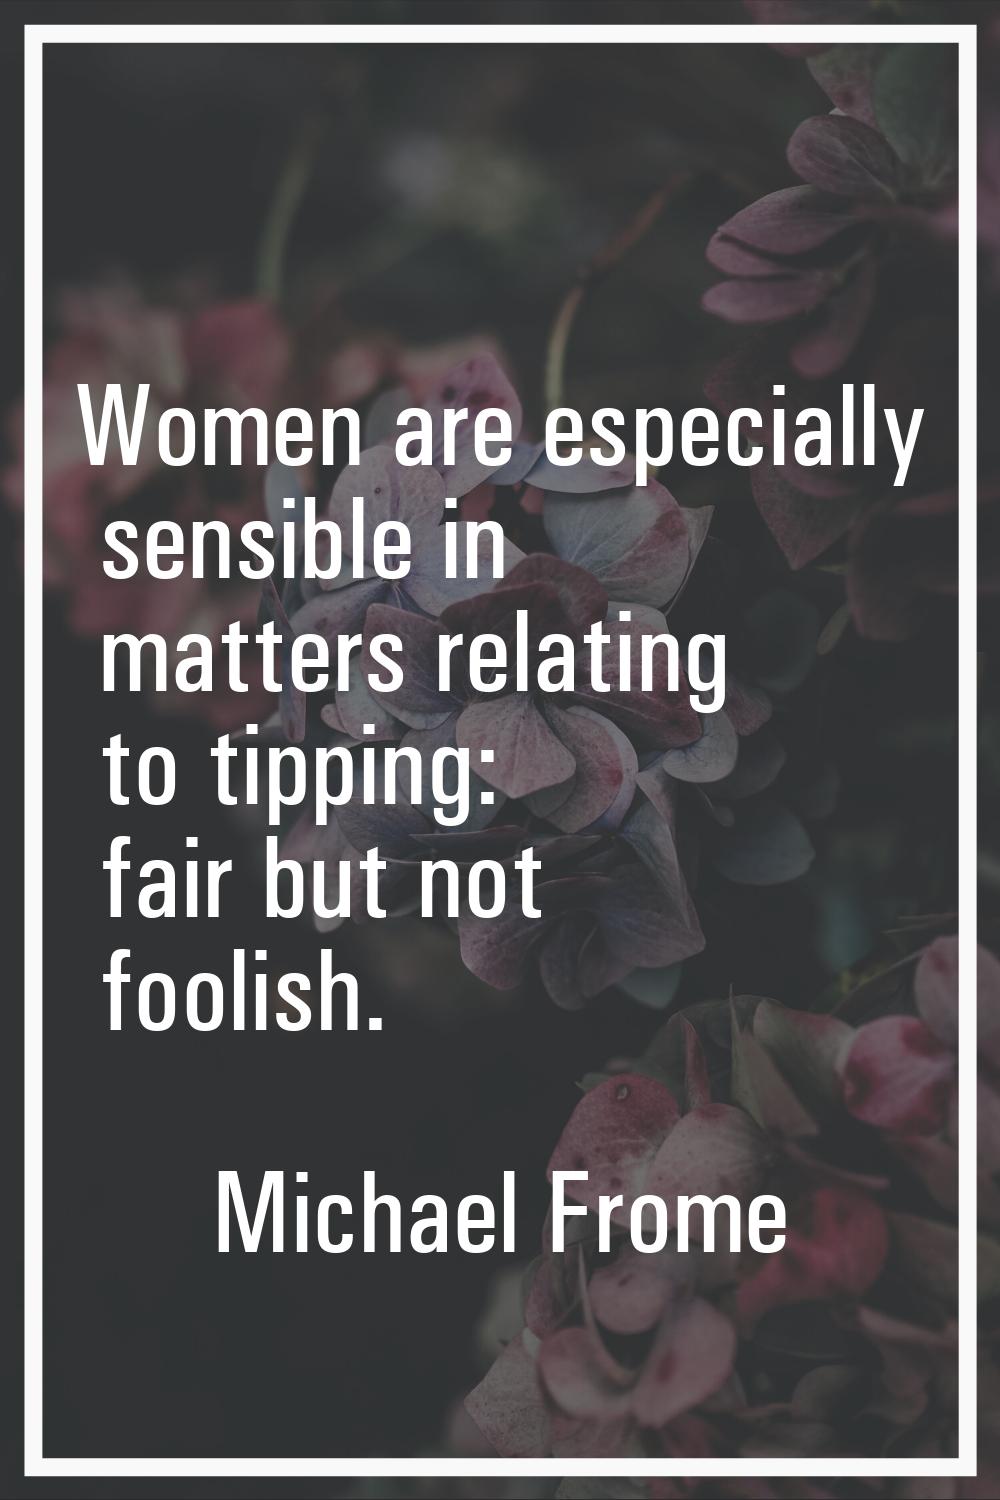 Women are especially sensible in matters relating to tipping: fair but not foolish.